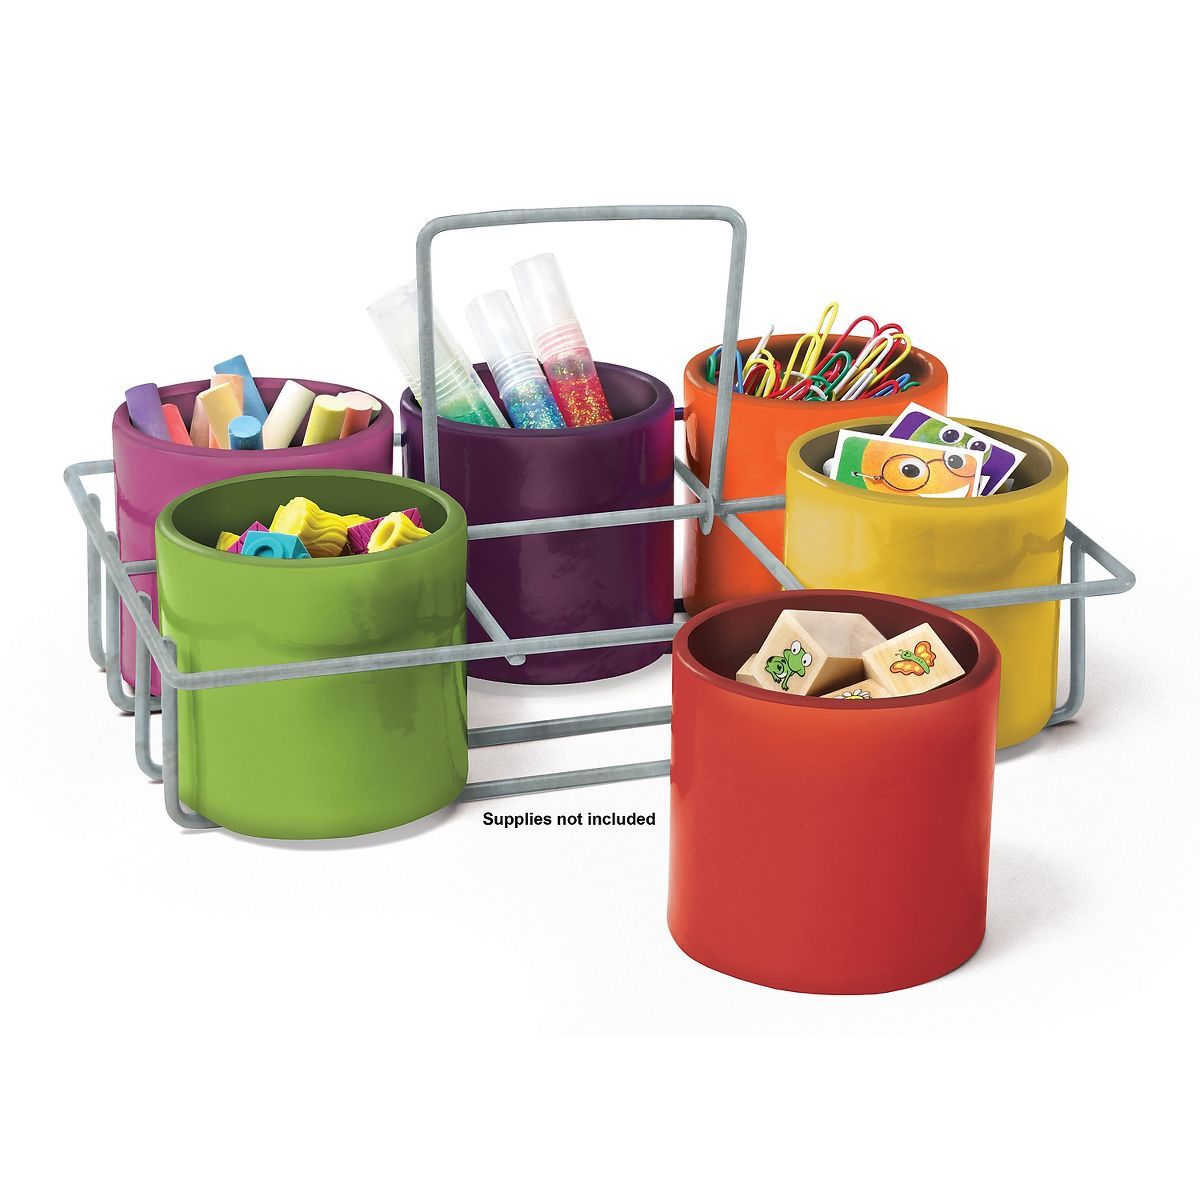 Essential Learning Sensational Classroom 6-Cup Caddy ELP626687 | Target